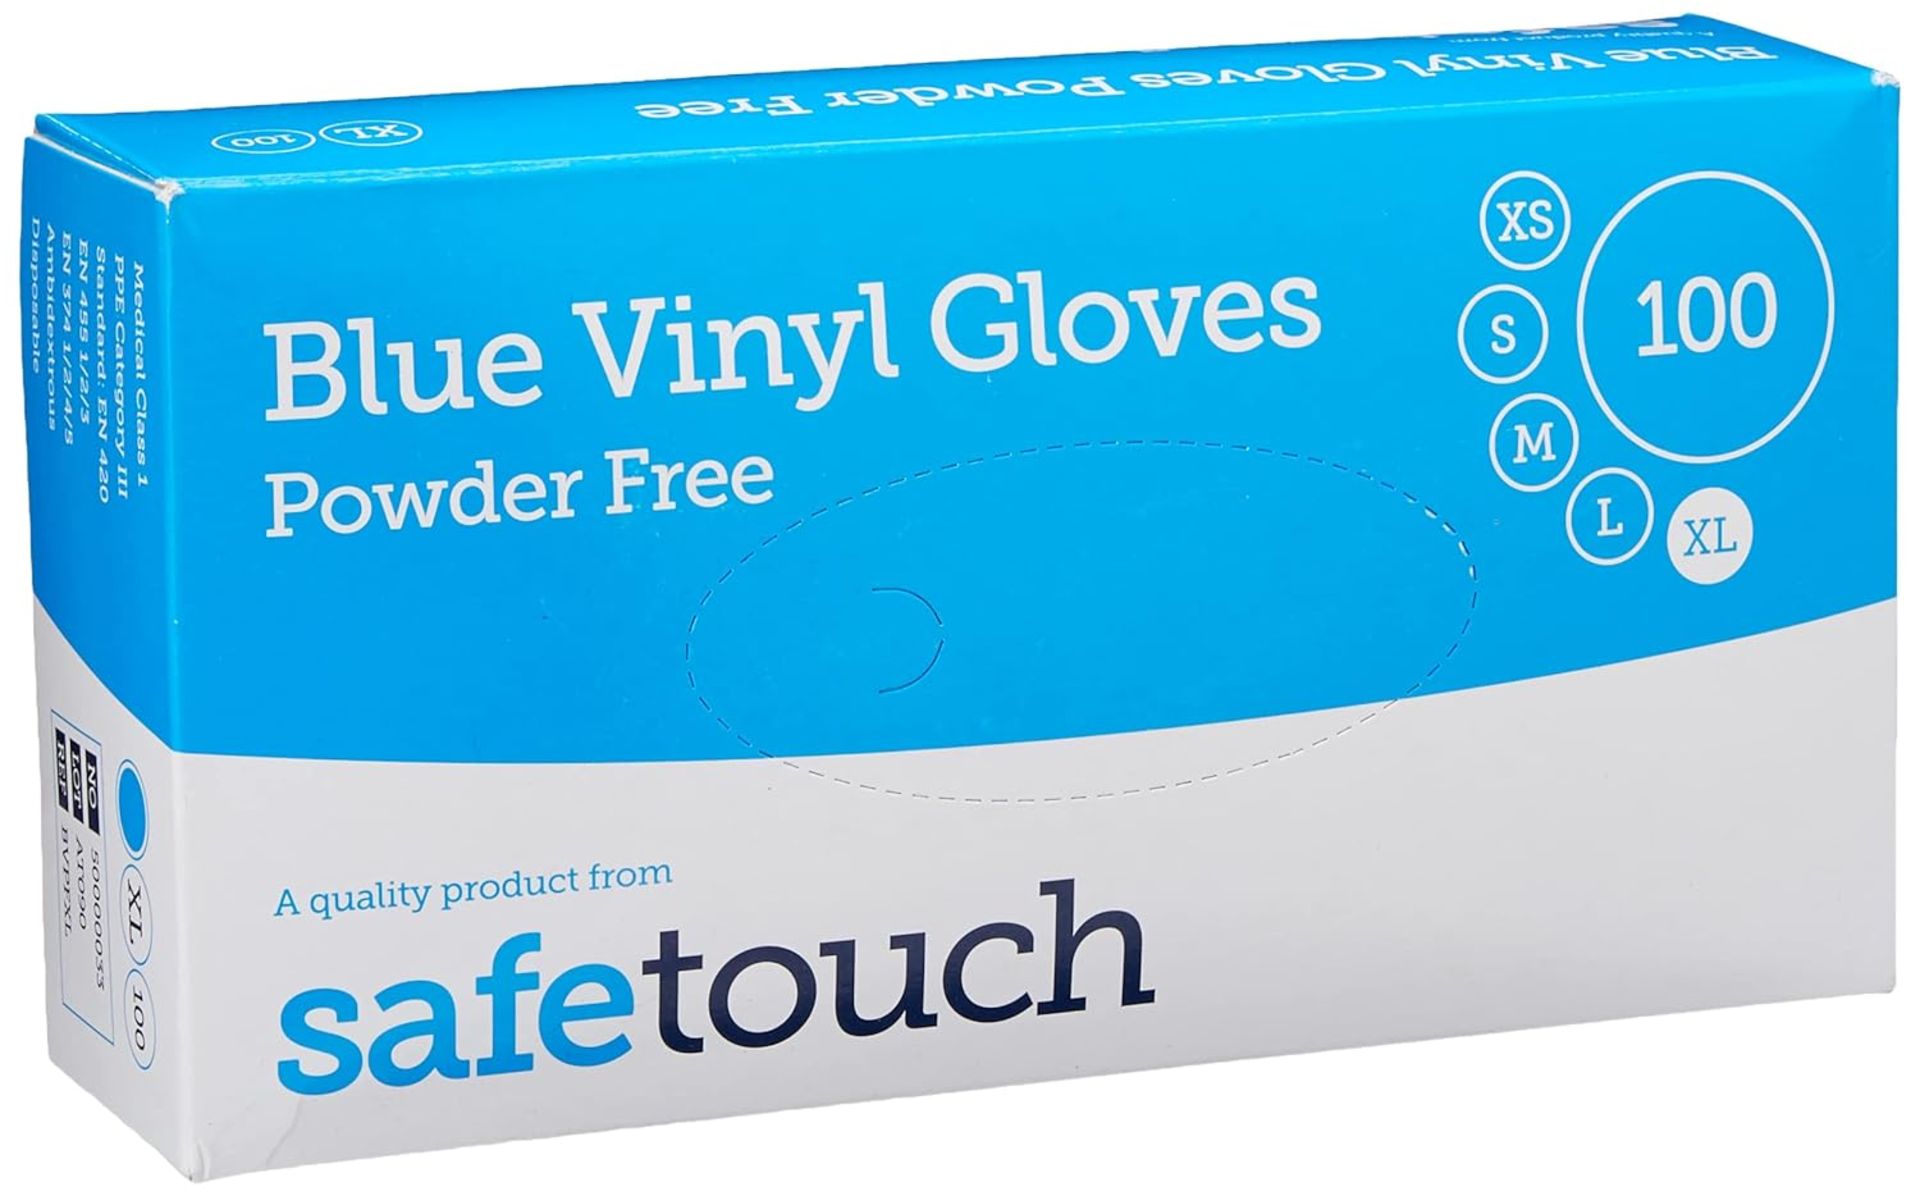 100 X BRAND NEW PACKS OF 100 SAFETOUCH BLUE VINYL GLOVES POWDER FREE SIZE XL BLUE EXP OCT 2026